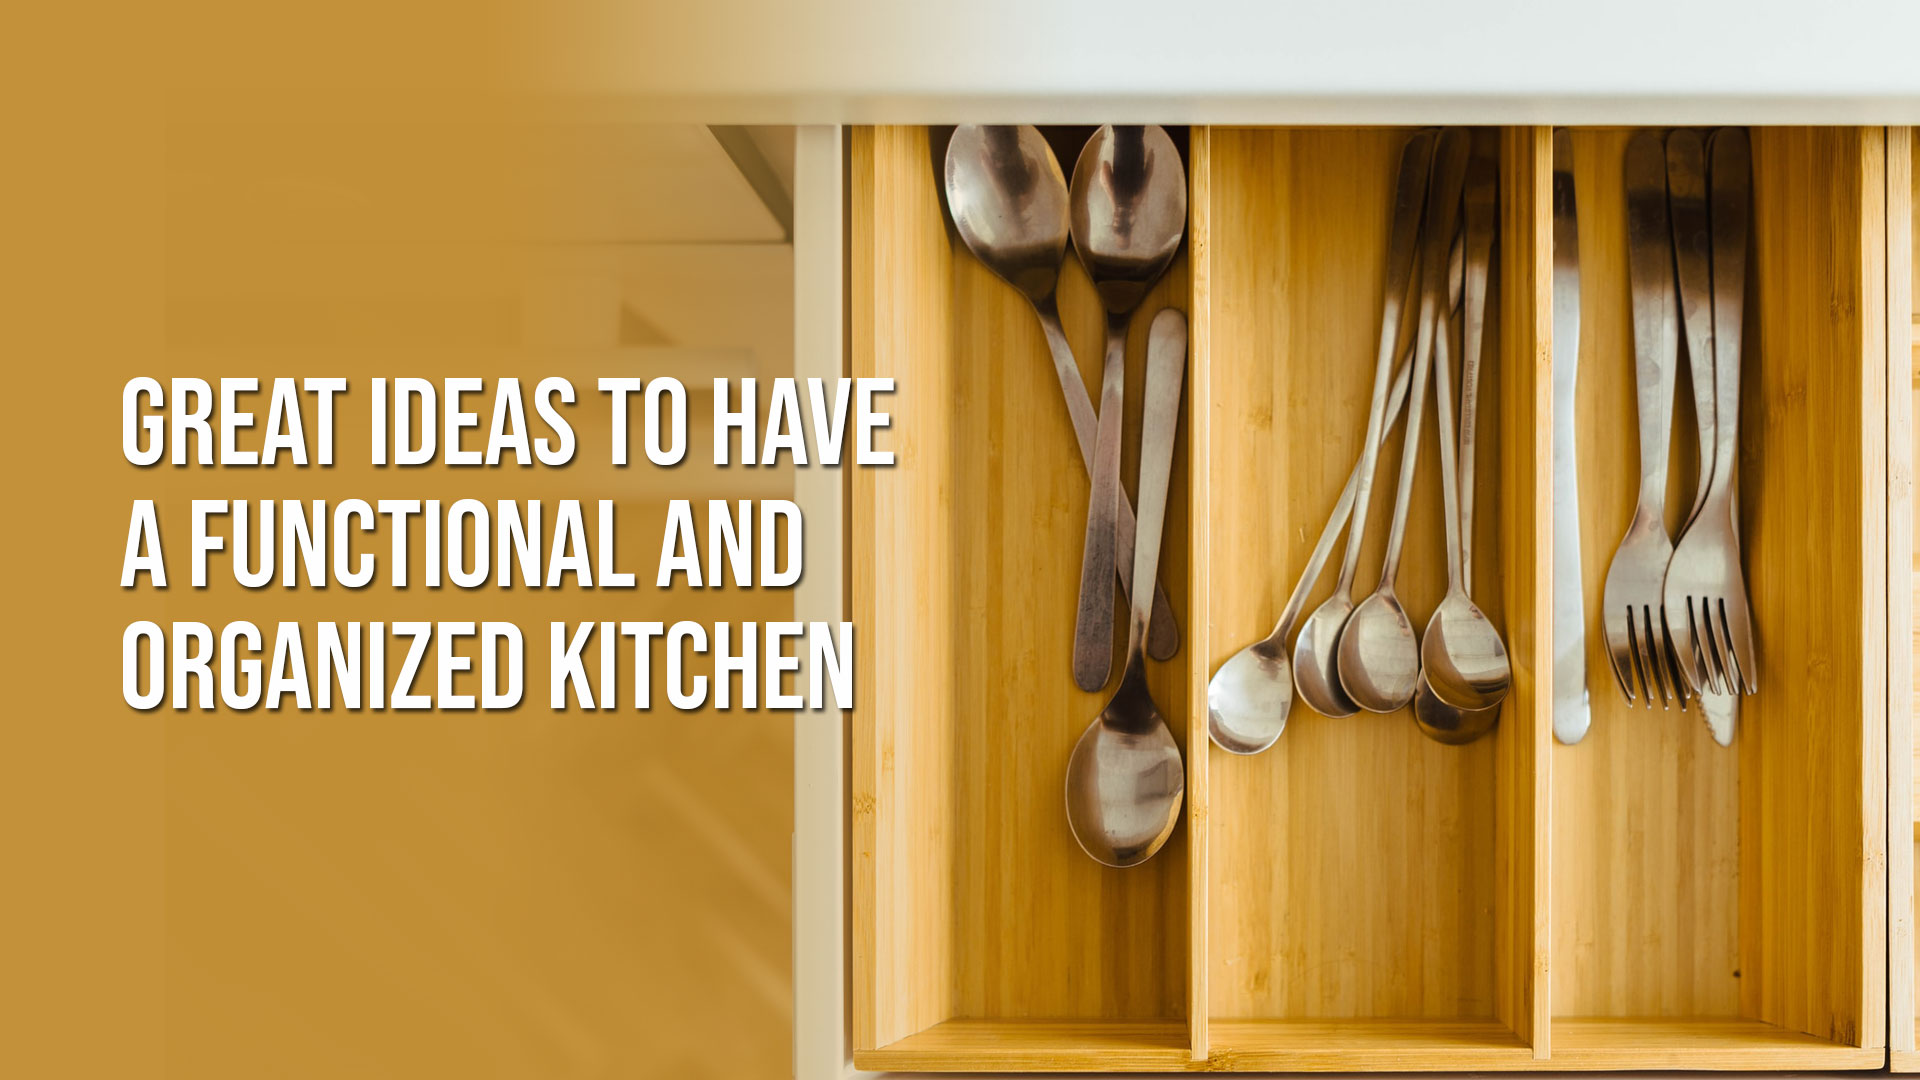 Great Ideas to Have a Functional and Organized Kitchen